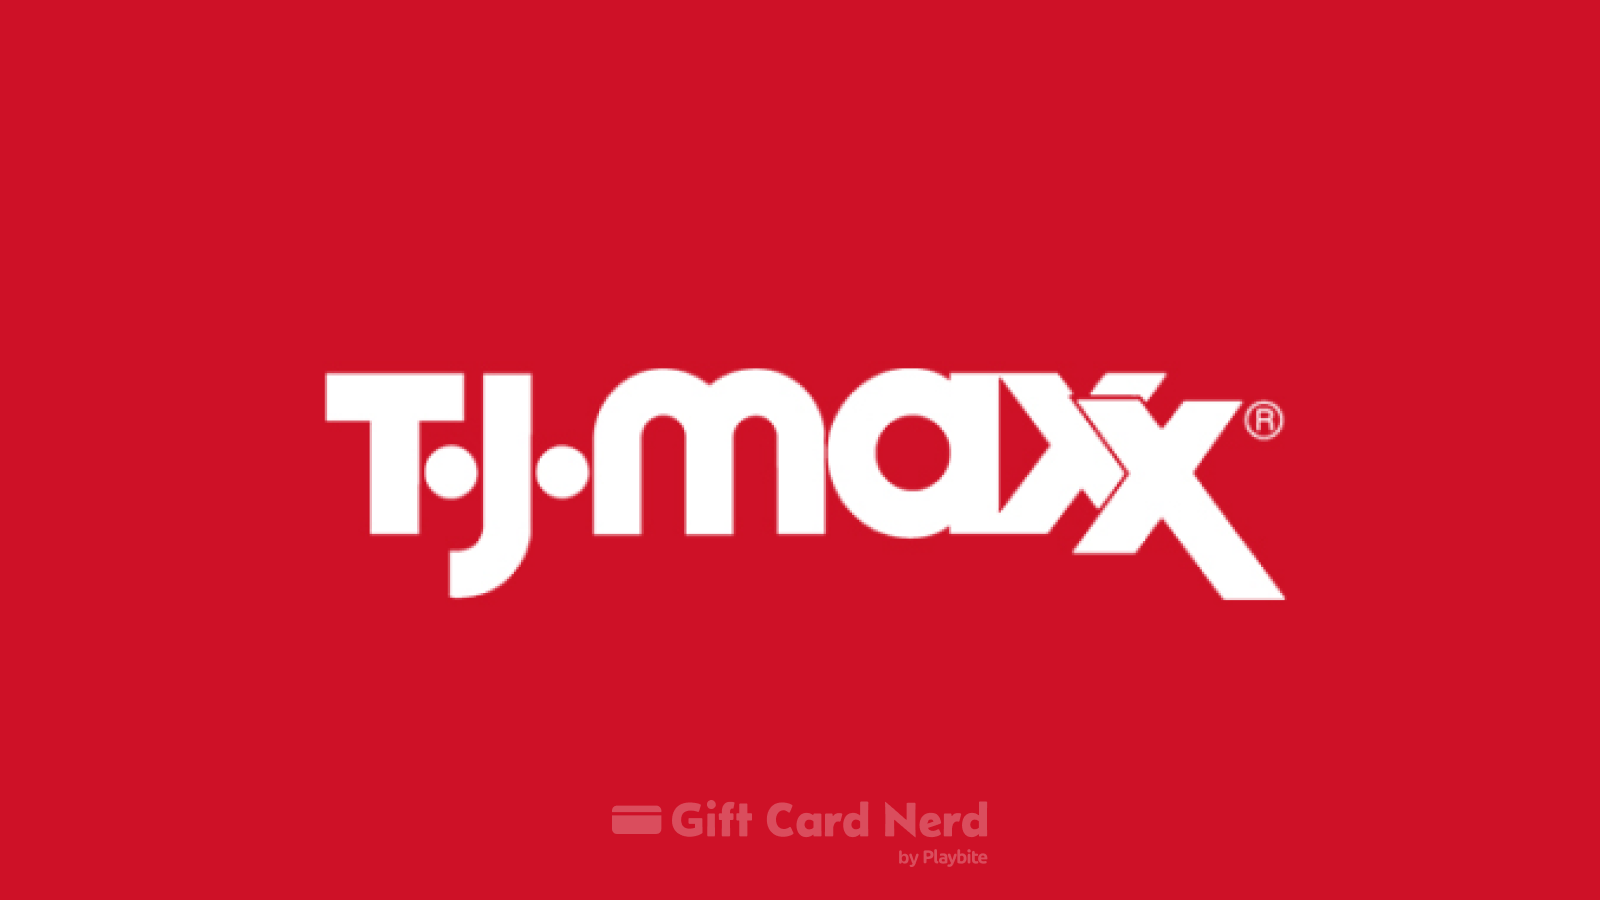 Can I Use a TJ Maxx Gift Card on Steam?